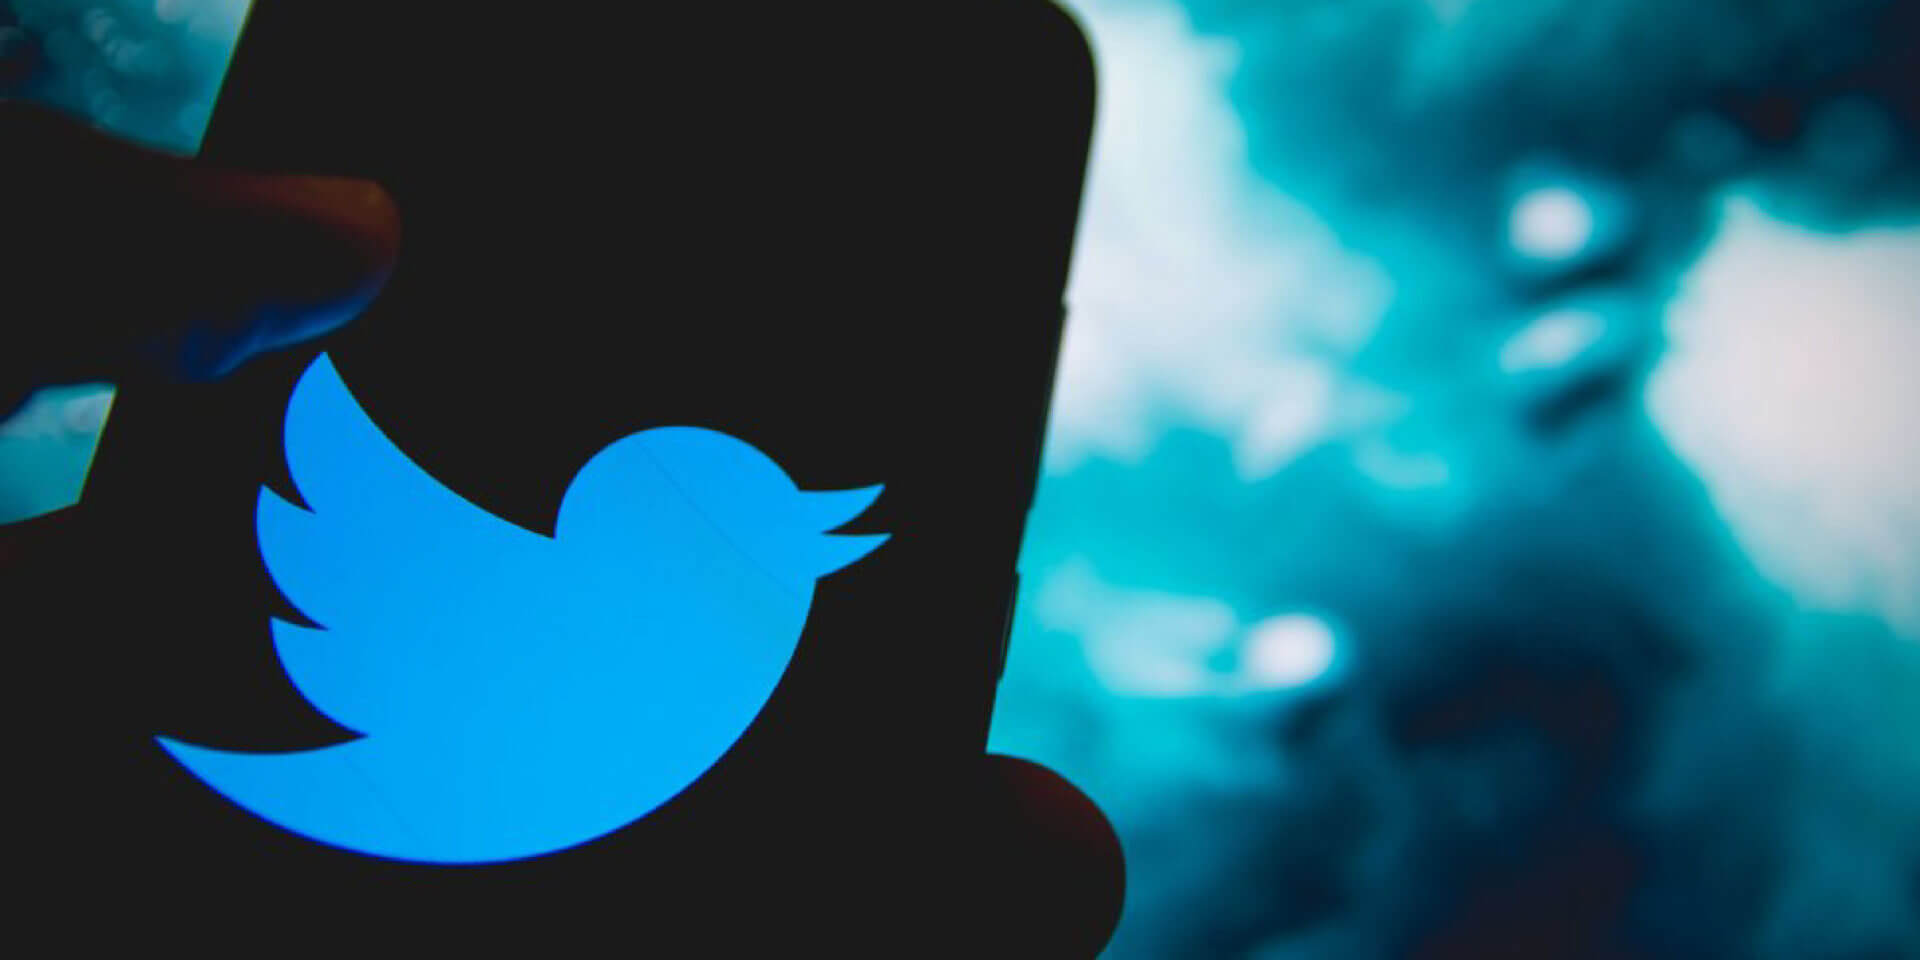 KNBC-TV : USC Study: Political Discourse on Twitter Helped Predict COVID-19 Outbreak Sites